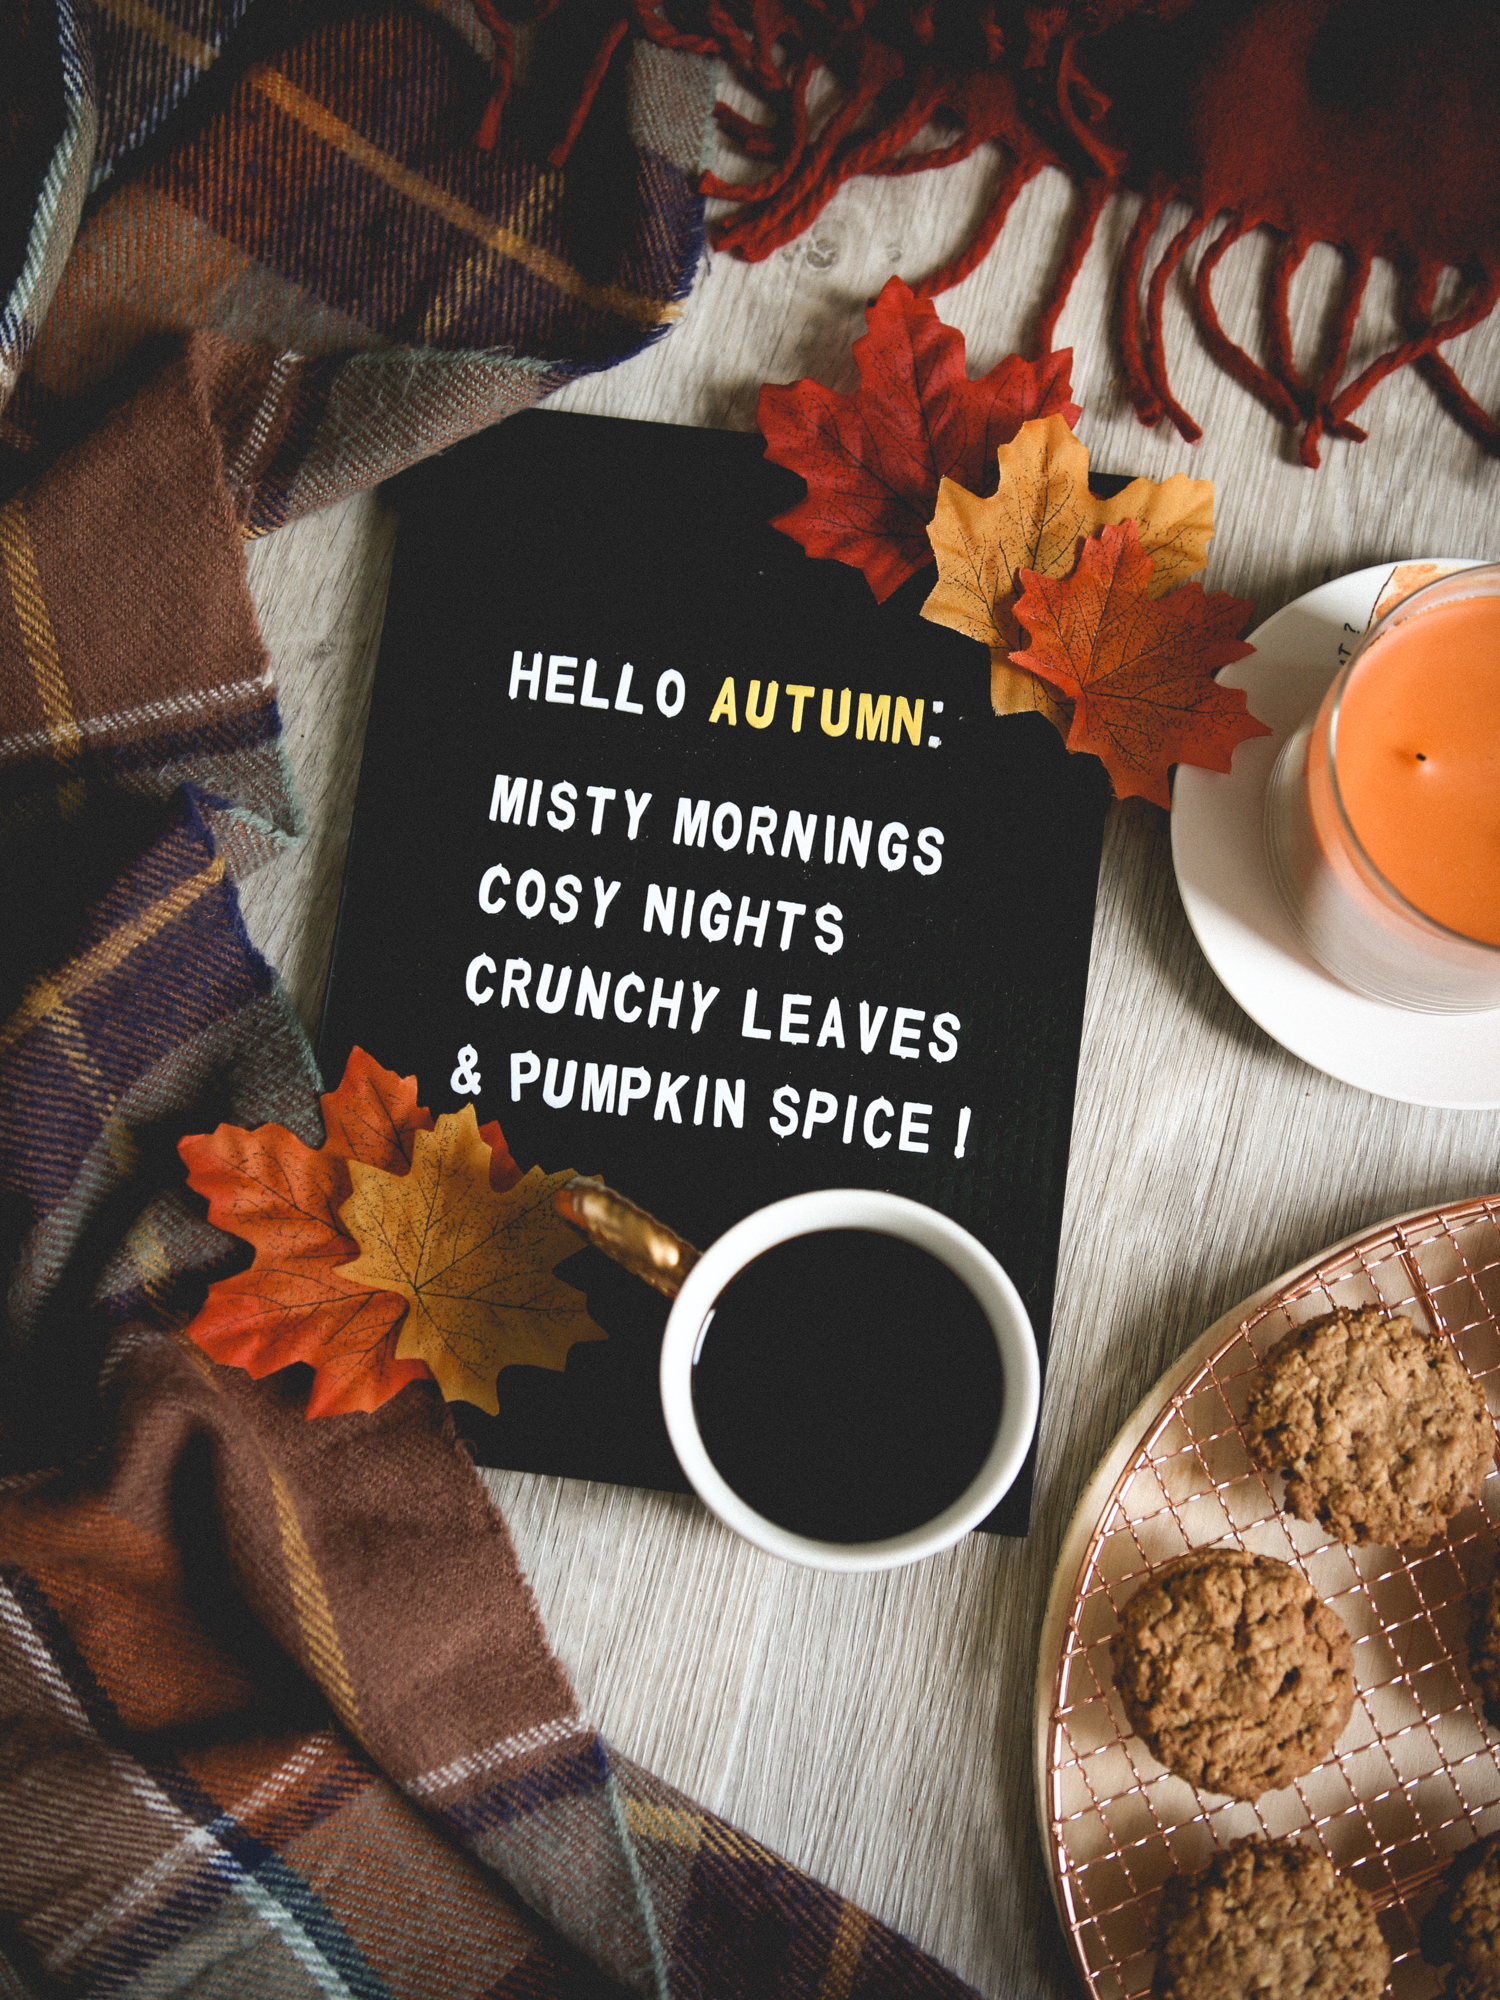 Bring The Fall Vibes Into Your Home With DIY Room Decor